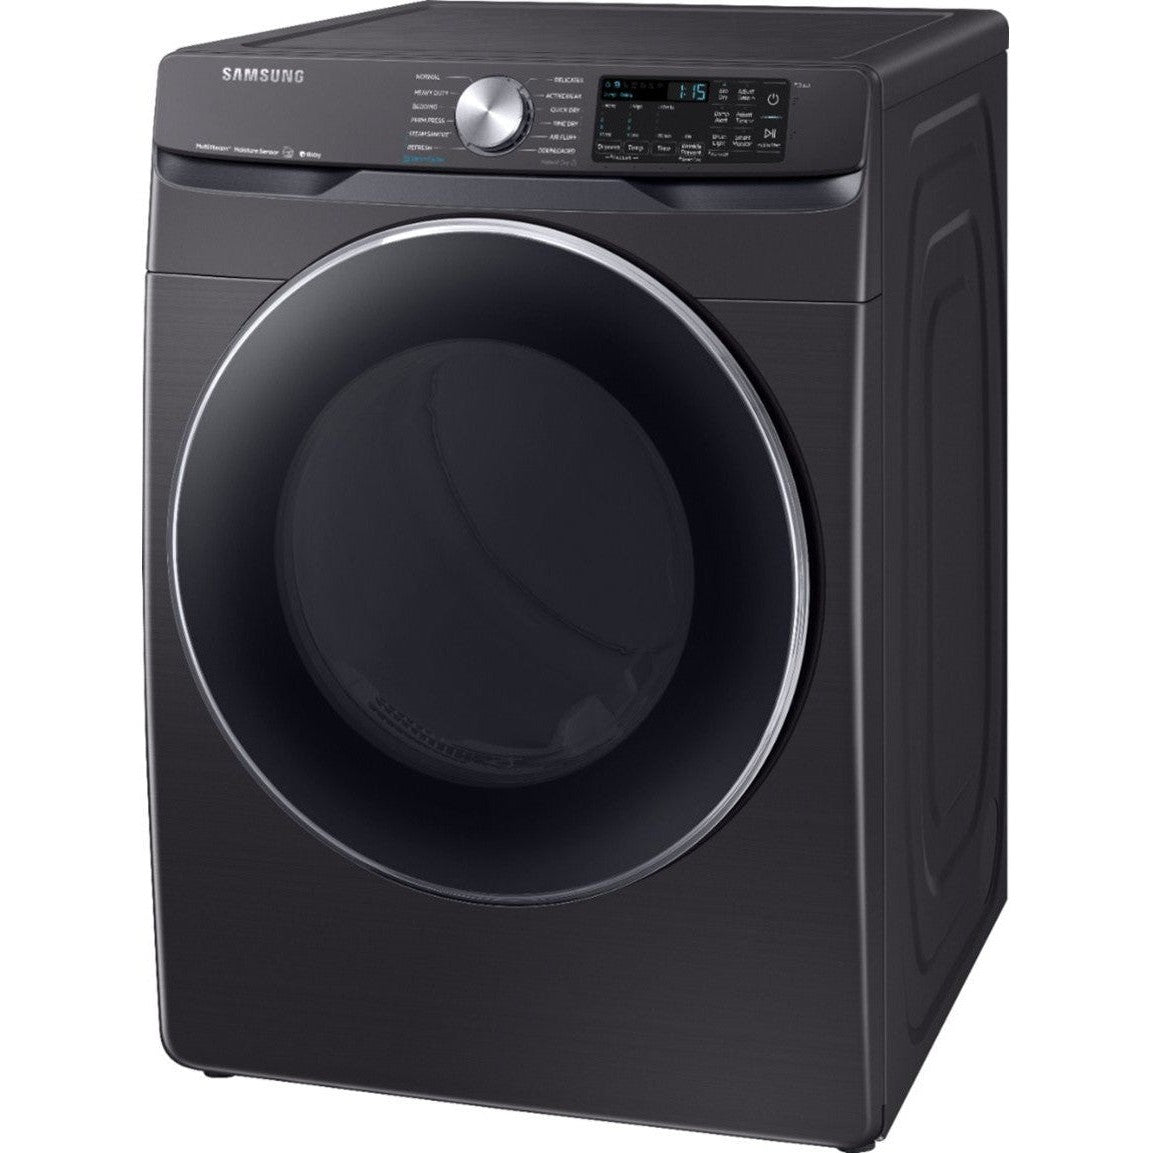 SAMSUNG DVG45R6300V/A3 7.5 cu. ft. Smart Gas Dryer with Steam Sanitize+ in Black Stainless Steel